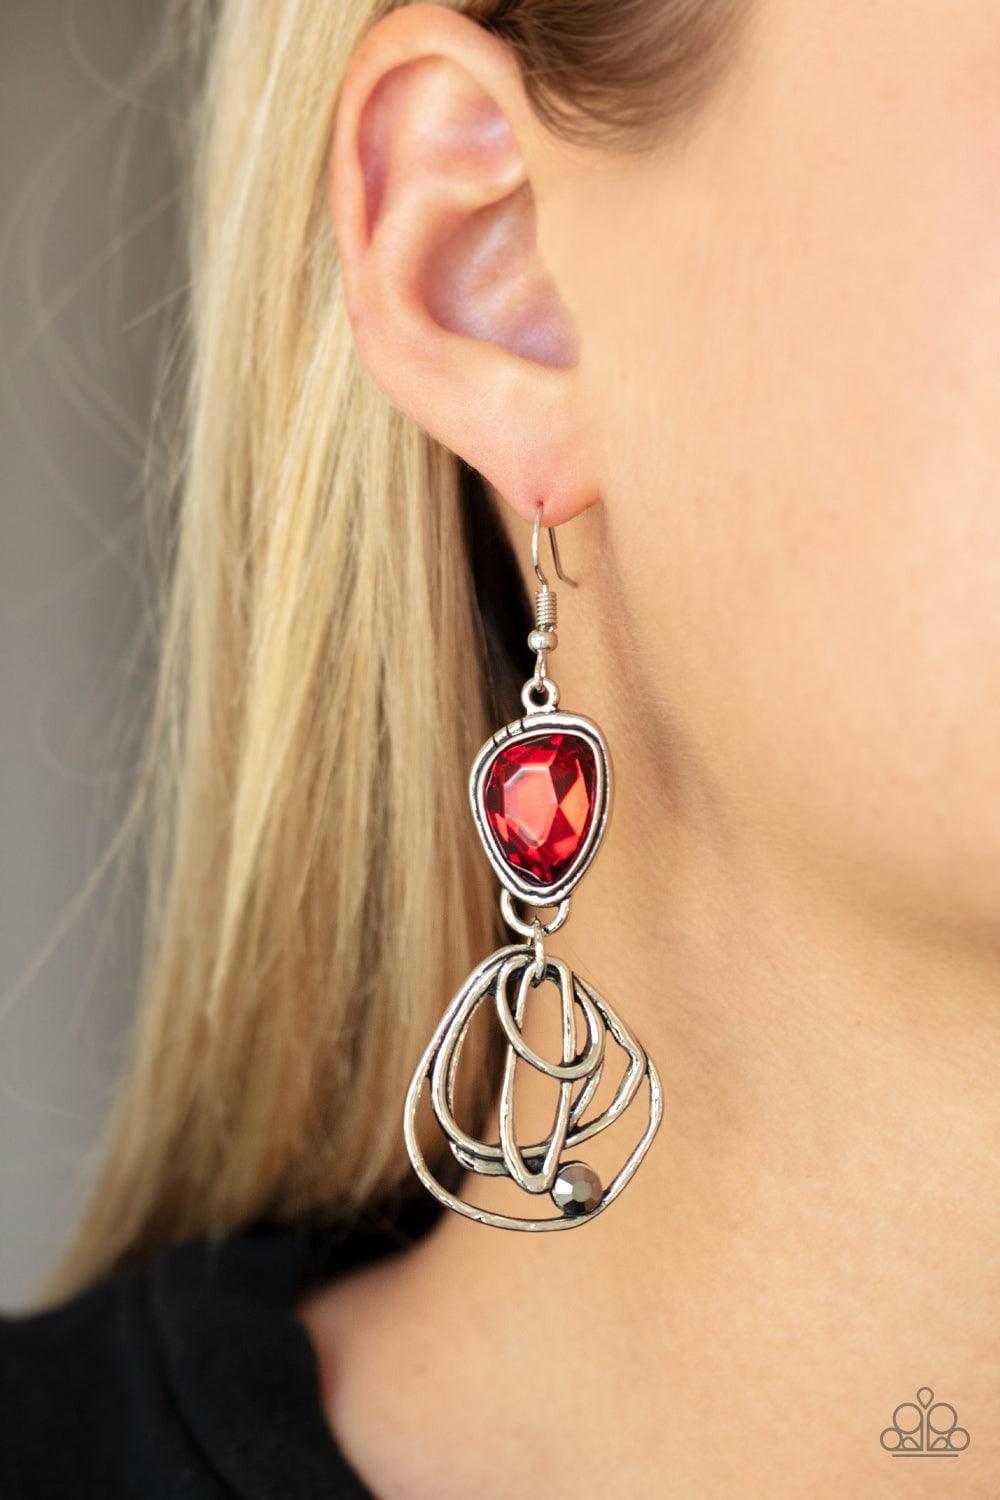 Paparazzi Accessories - Galactic Drama - Red Earrings - Bling by JessieK